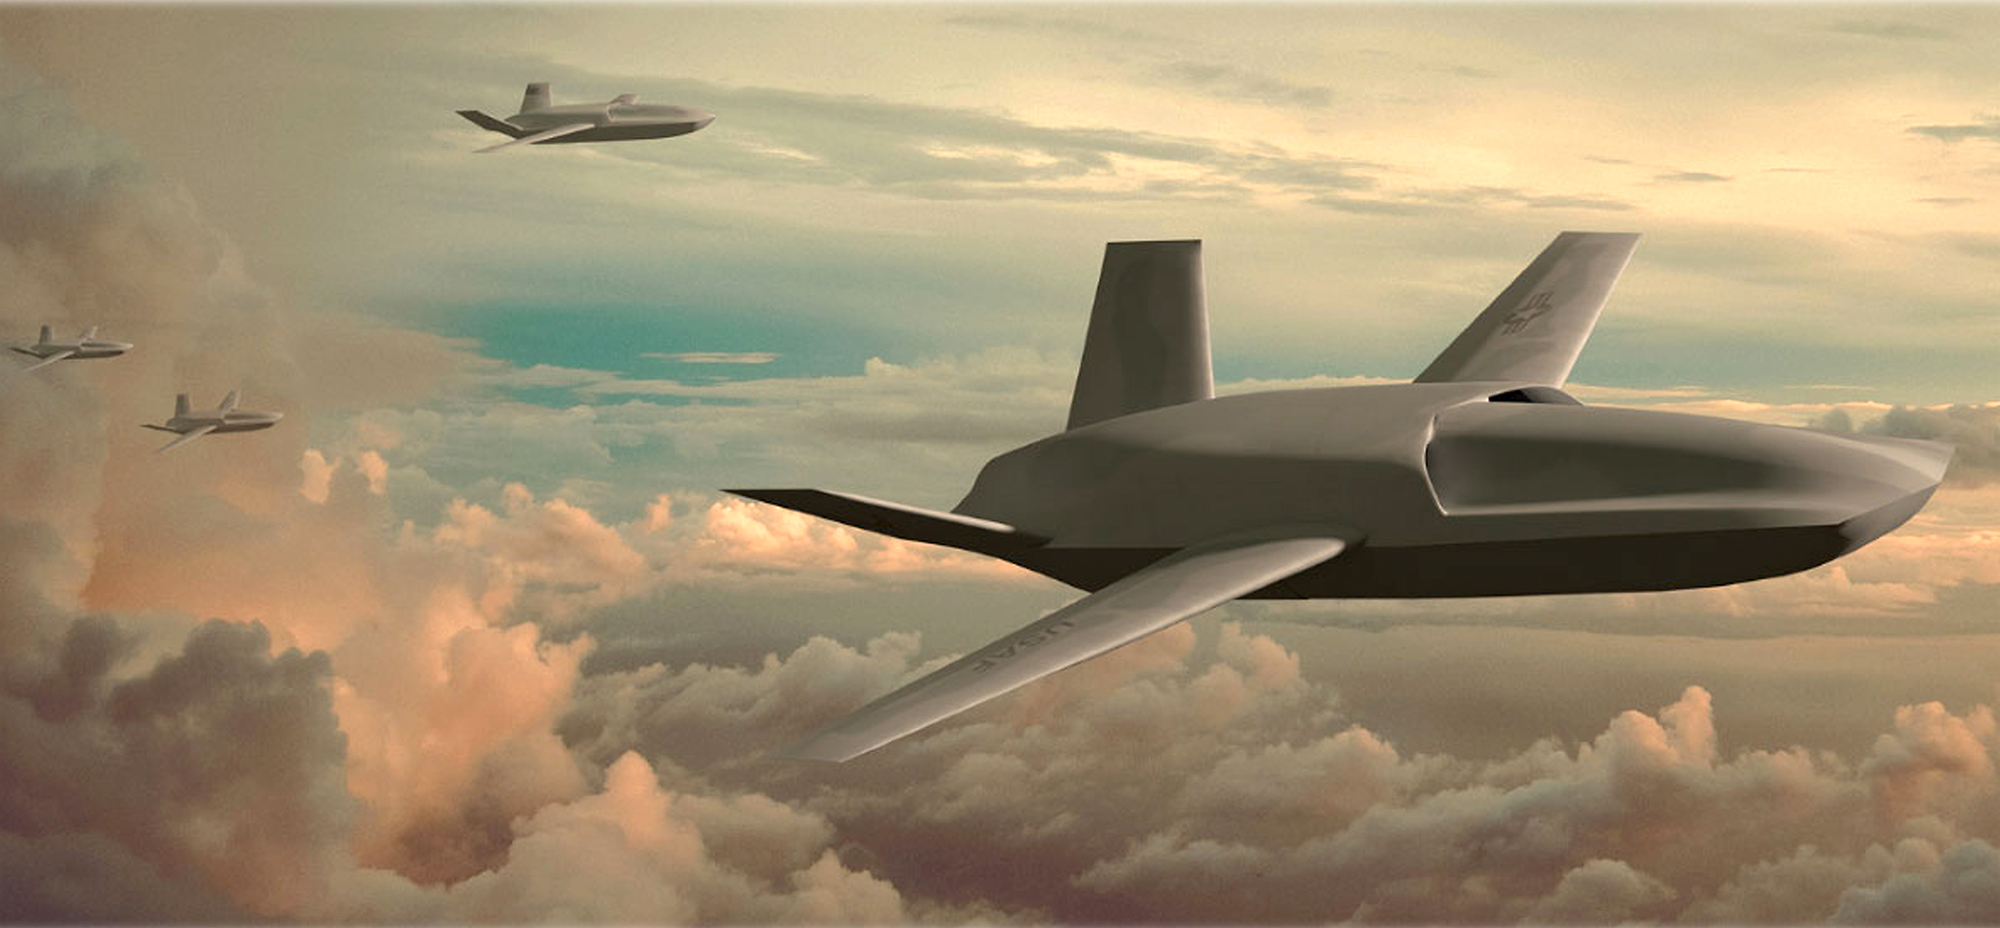 India's Stealthy Unmanned Combat Air Vehicle Demonstrator Breaks Cover  (Updated)